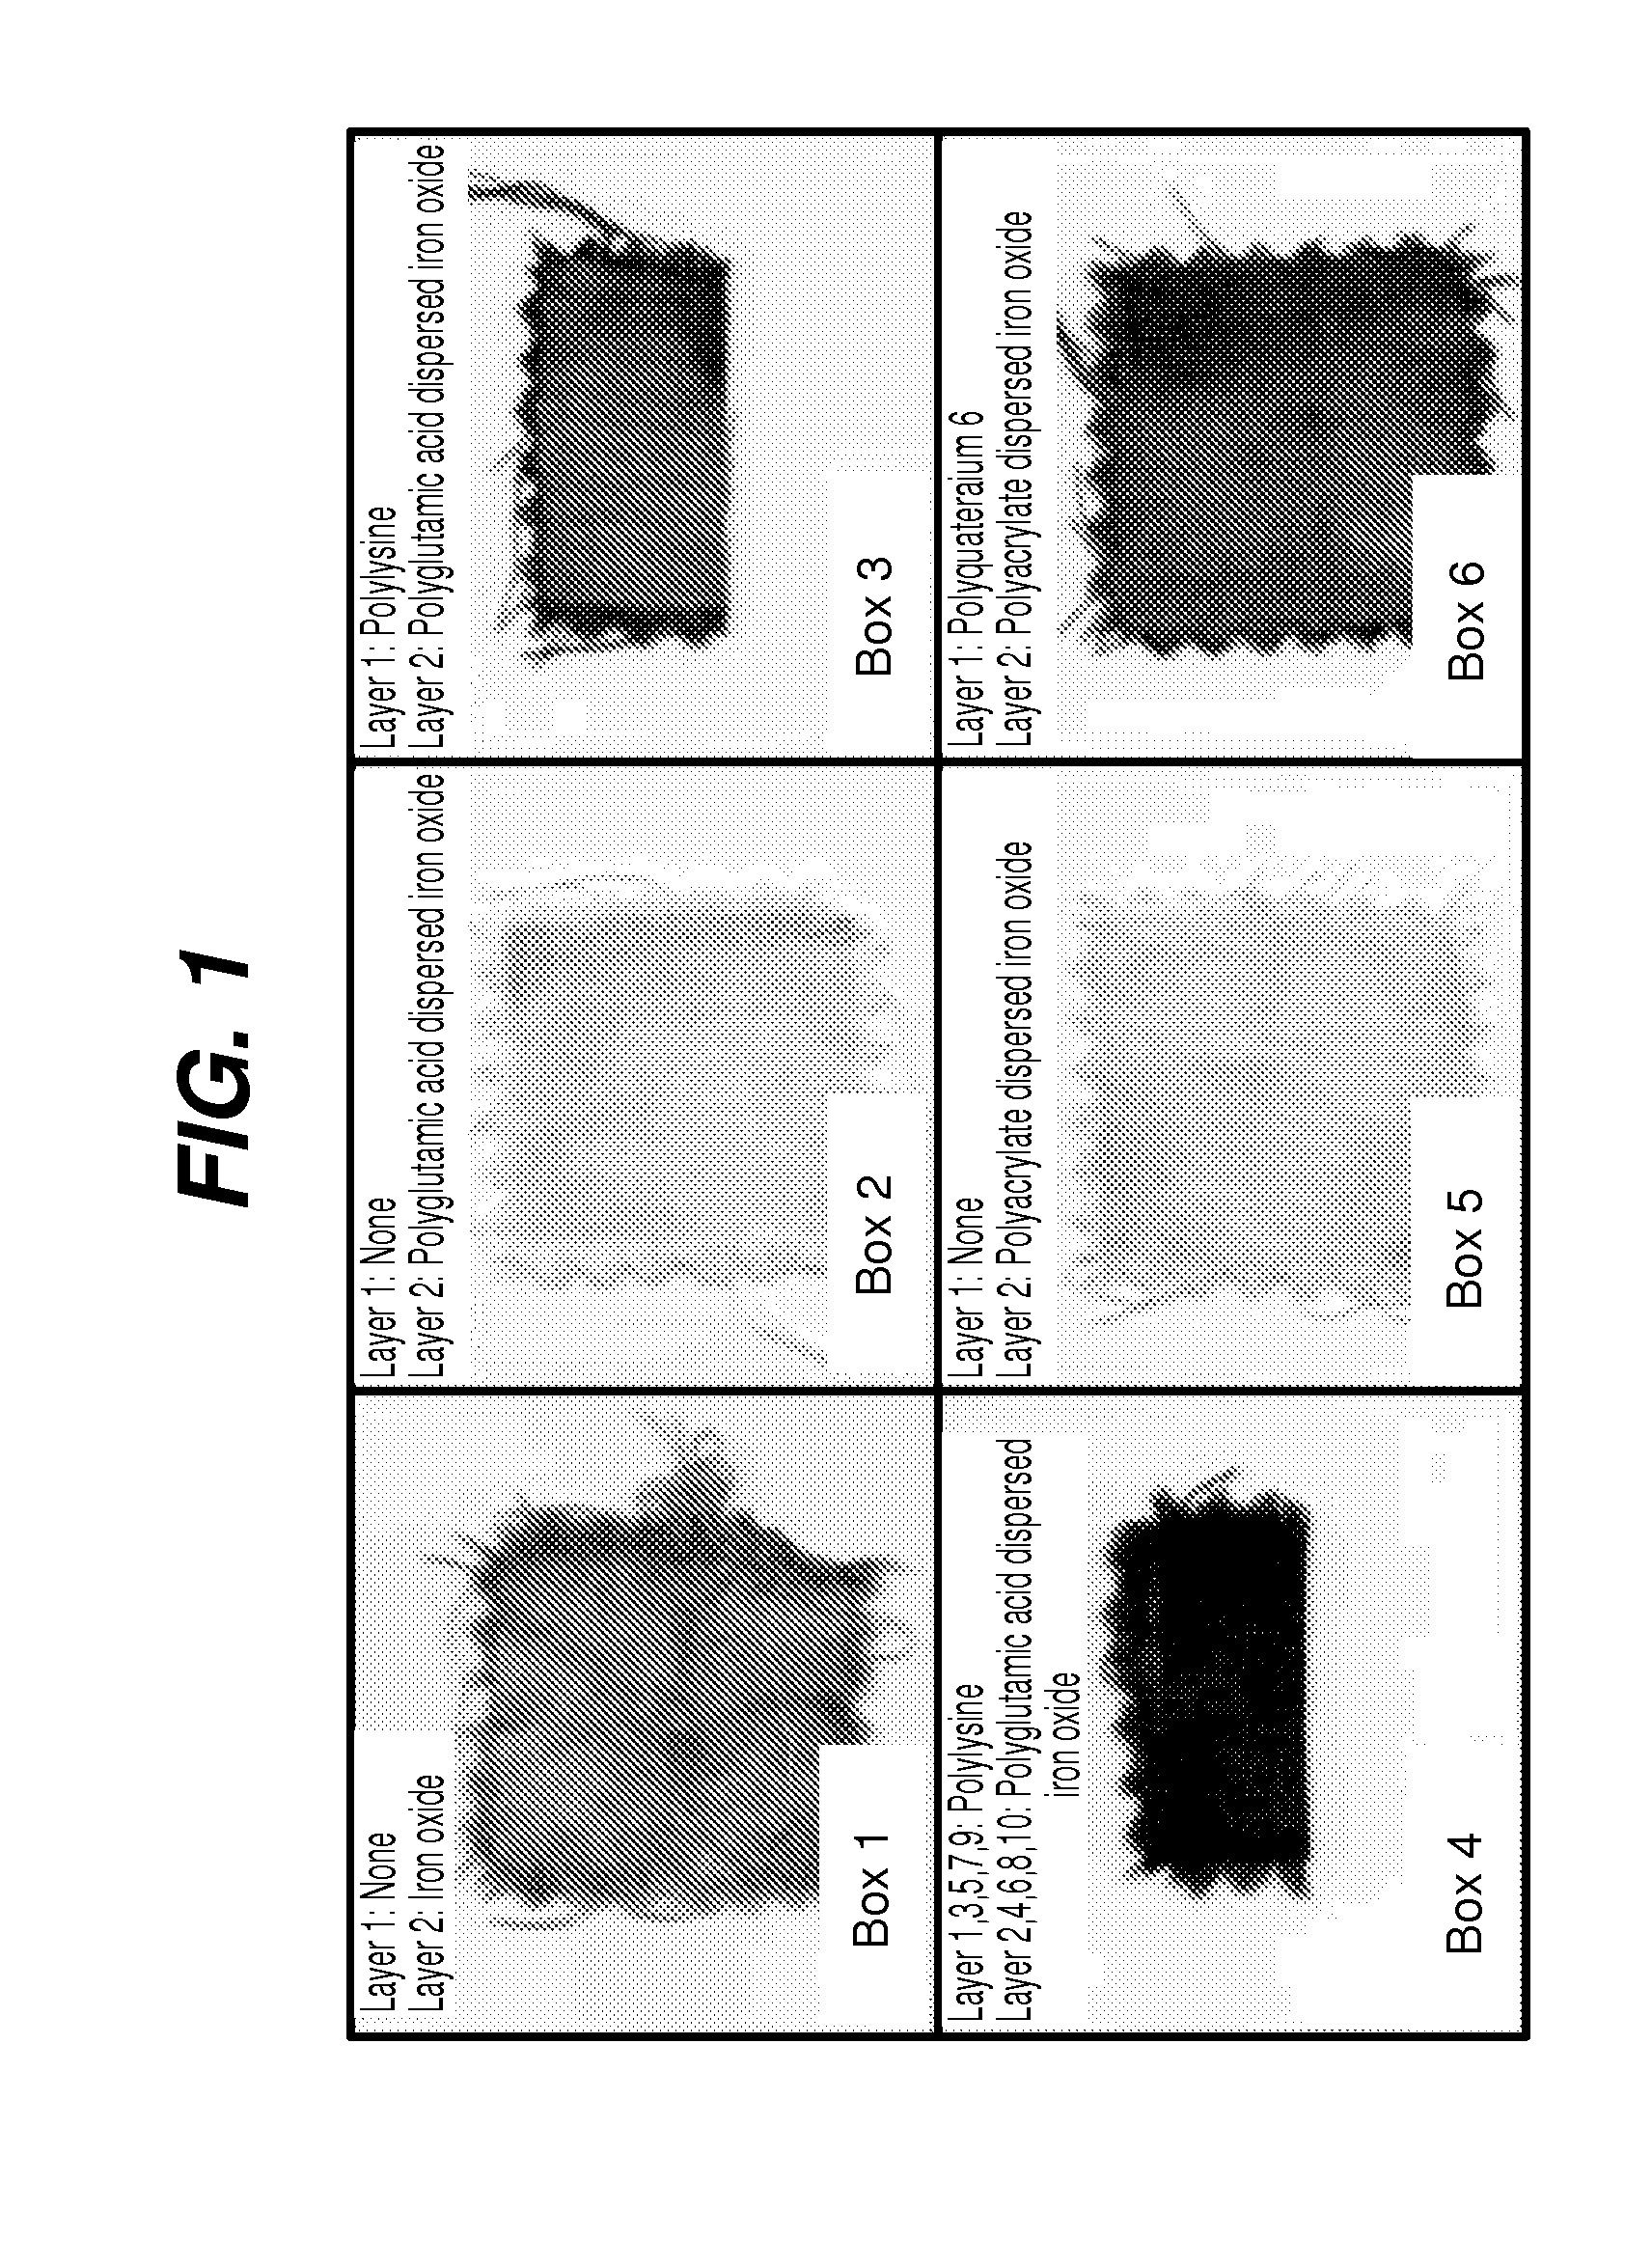 Method of depositing particulate benefit agents on keratin-containing substrates